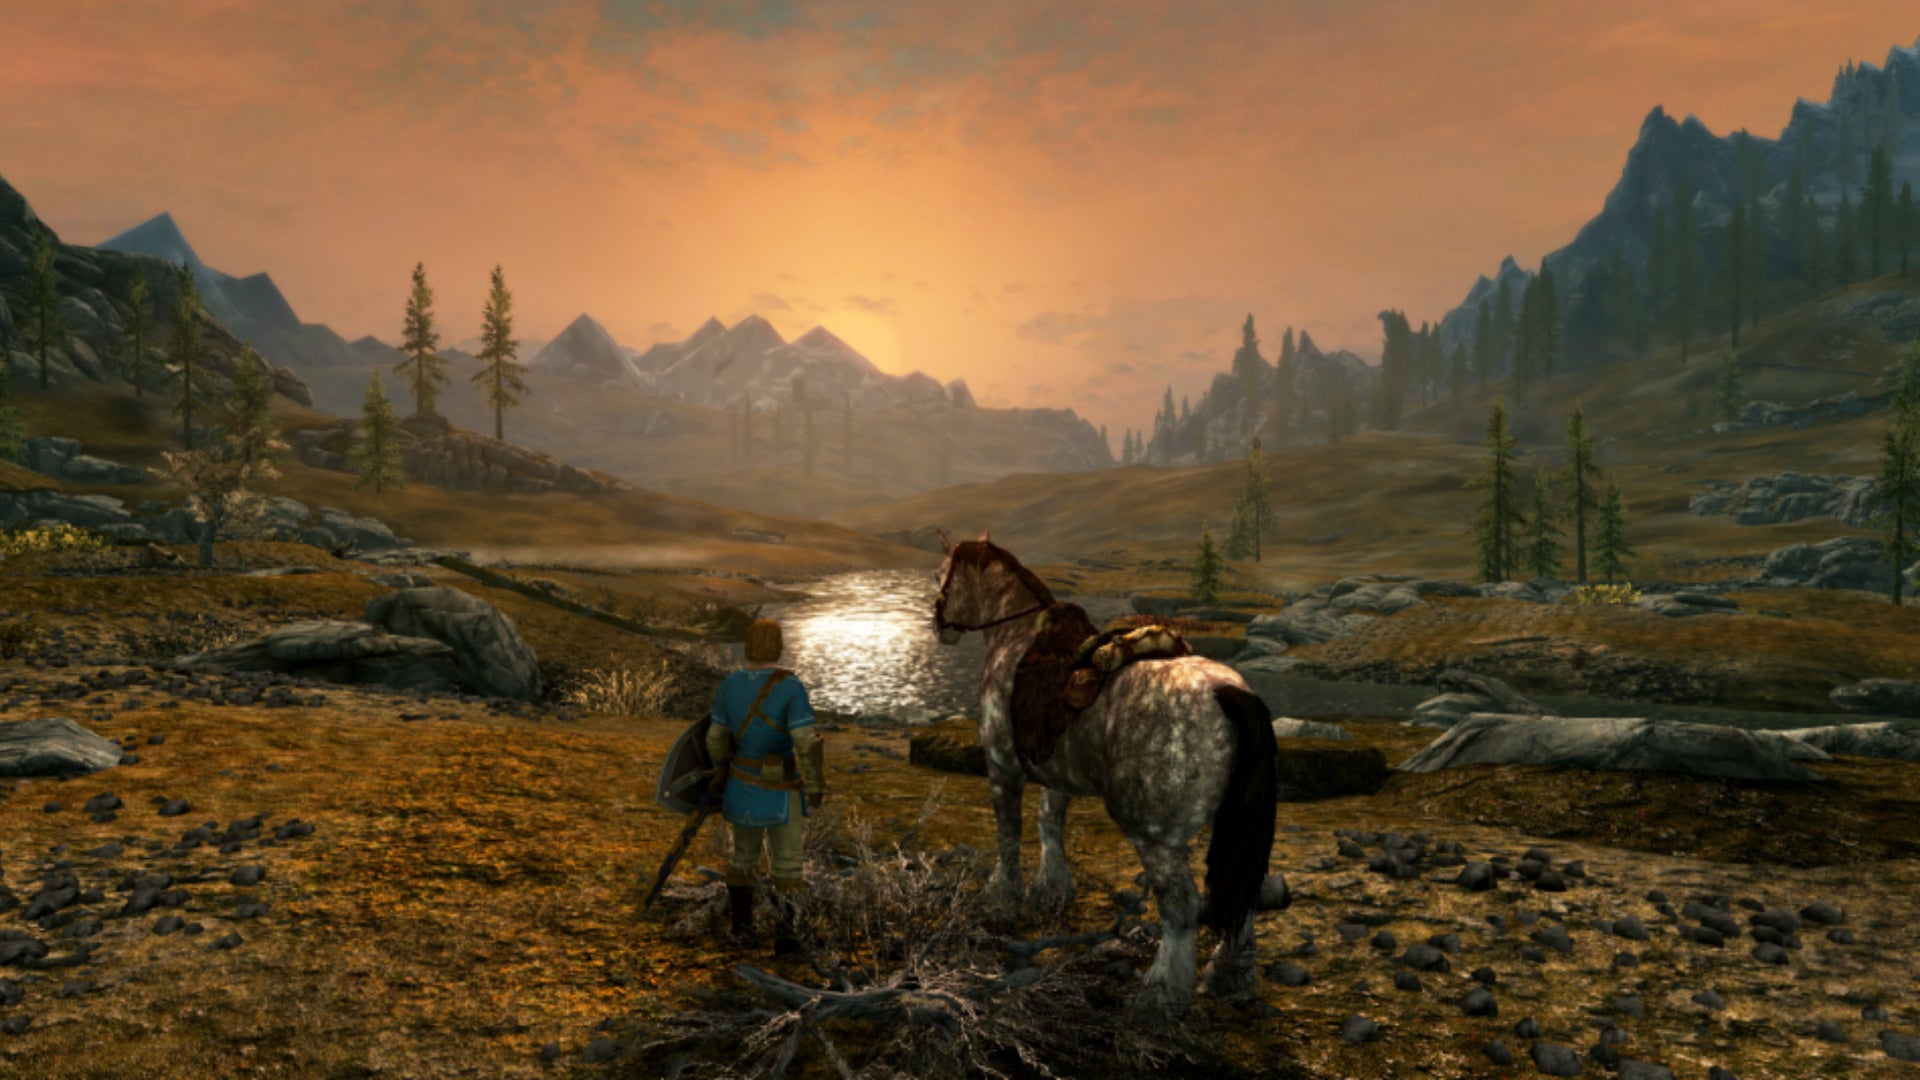 A Skyrim player in Hyrule gear stands beside a horse